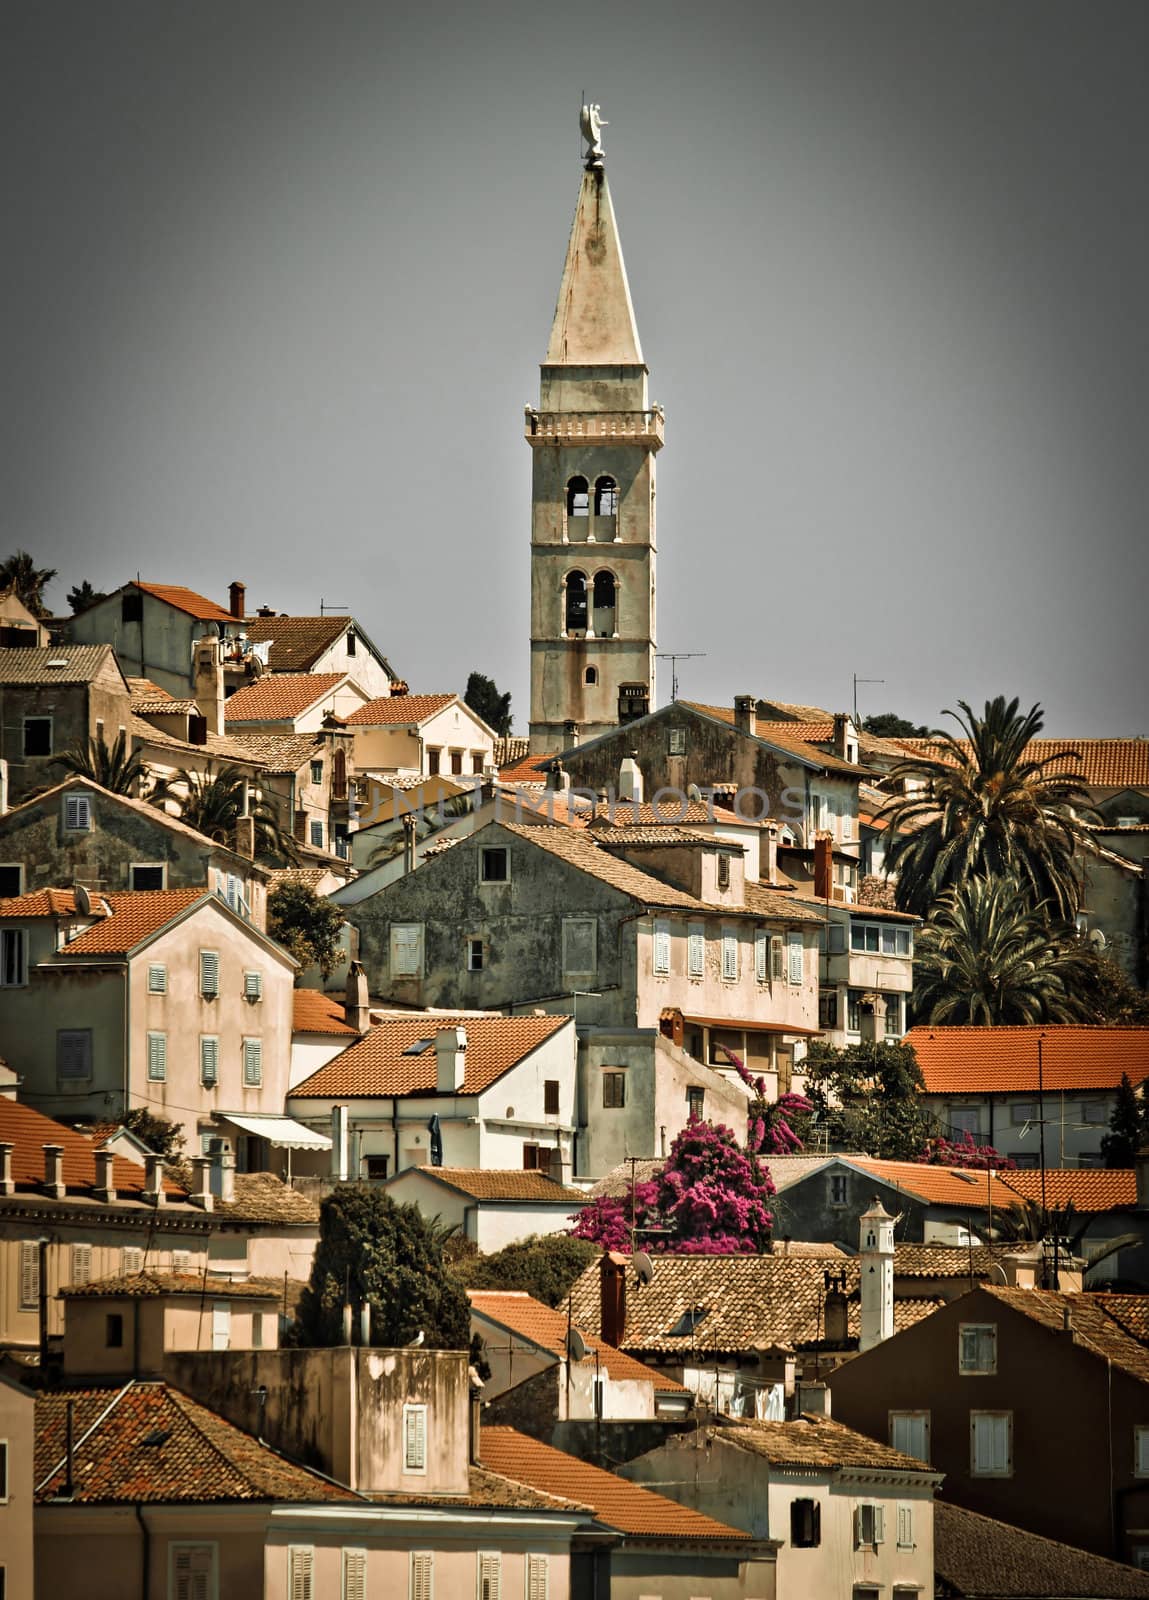 Picturesque town of Mali Losinj - vertical view by xbrchx